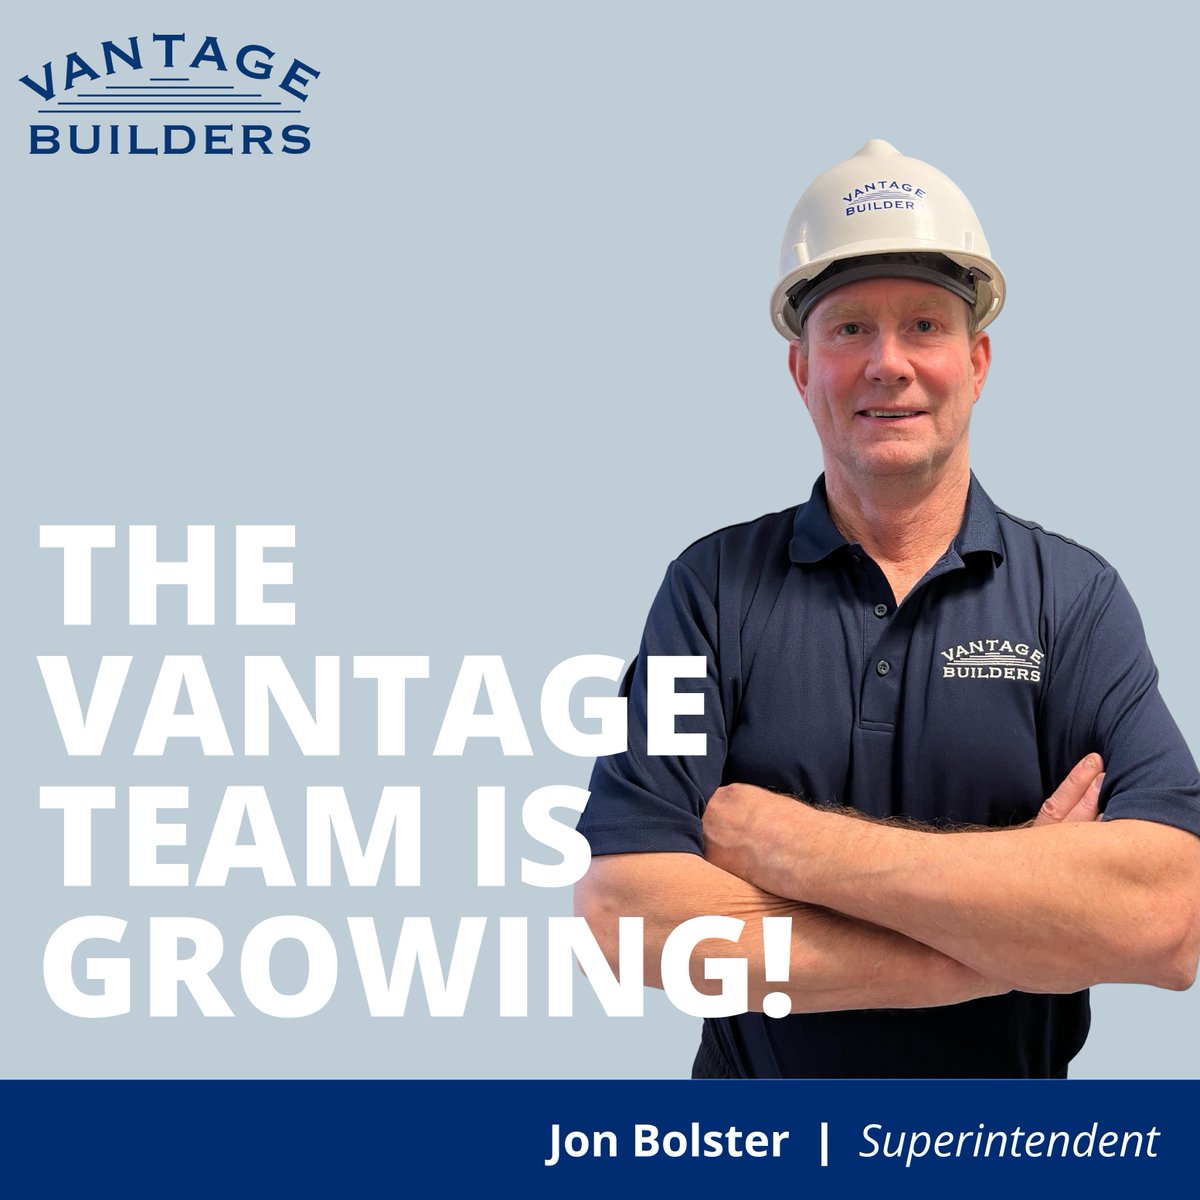 Vantage Builders is excited to welcome Jon Bolster as a member of our dependable team of Superintendents! Welcome, Jon!

#WelcomeWednesday #Welcome #NewTeamMember #Growth #NewHire #ConstructionCareers #ConstructionSuperintendent #CareersInConstruction #RIConstruction